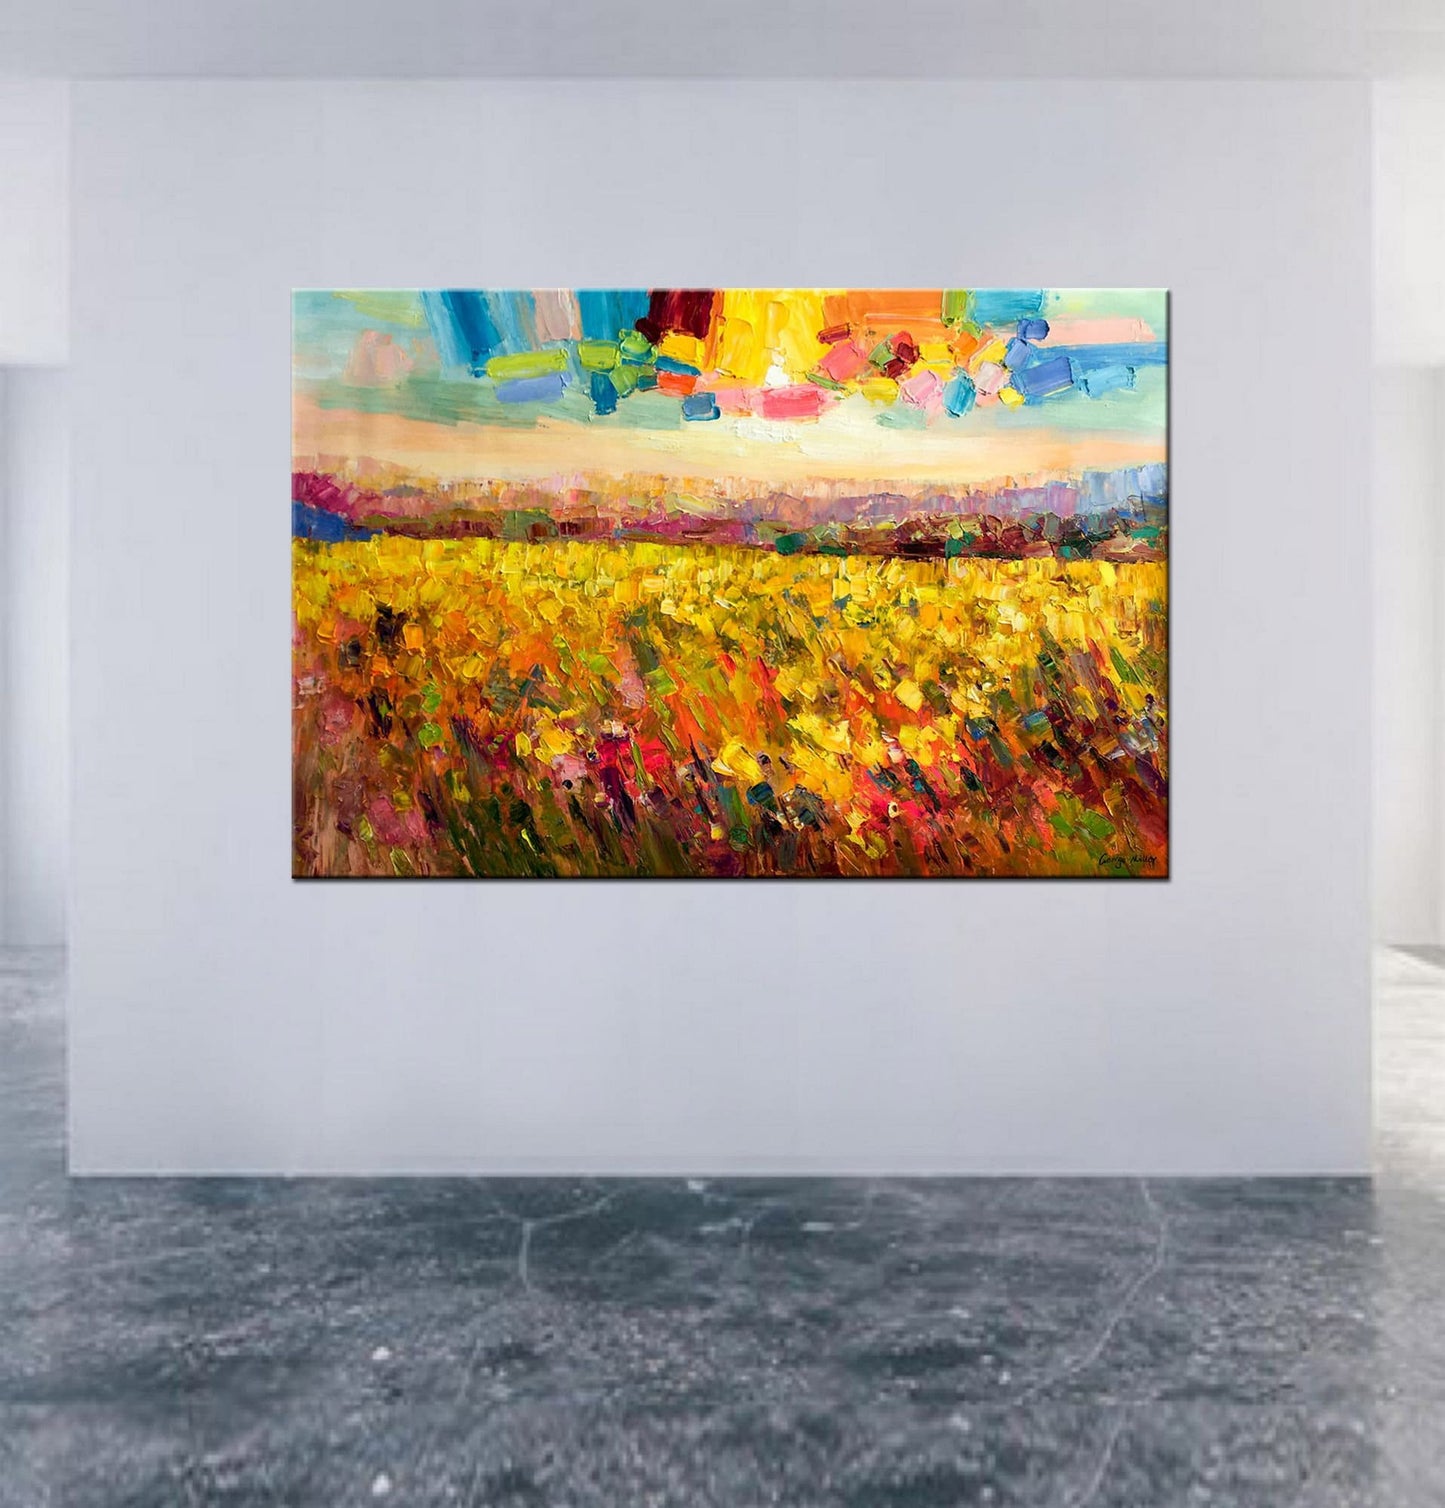 Large Oil Painting Landscape, Livingroom Wall Decor, Abstract Painting, Large Abstract Art, Landscape Painting, Contemporary Art, Canvas Art